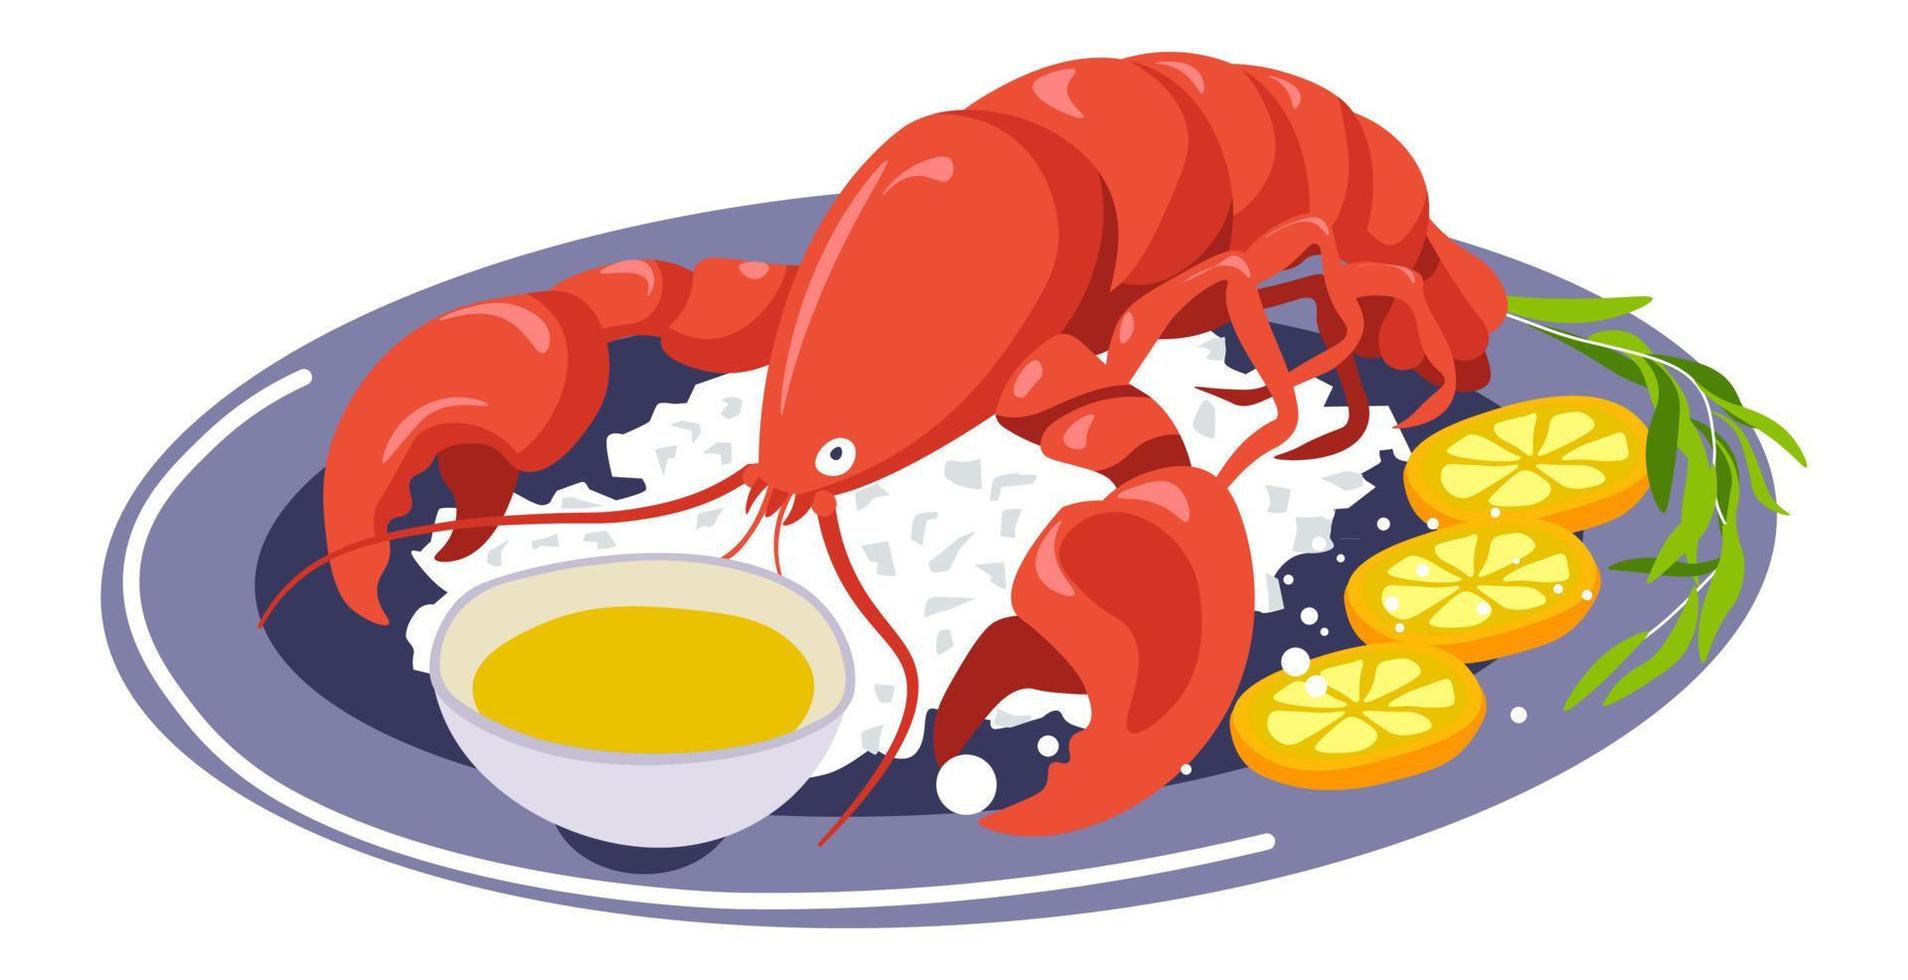 Baked crayfish with lemon slices, seafood dishes vector